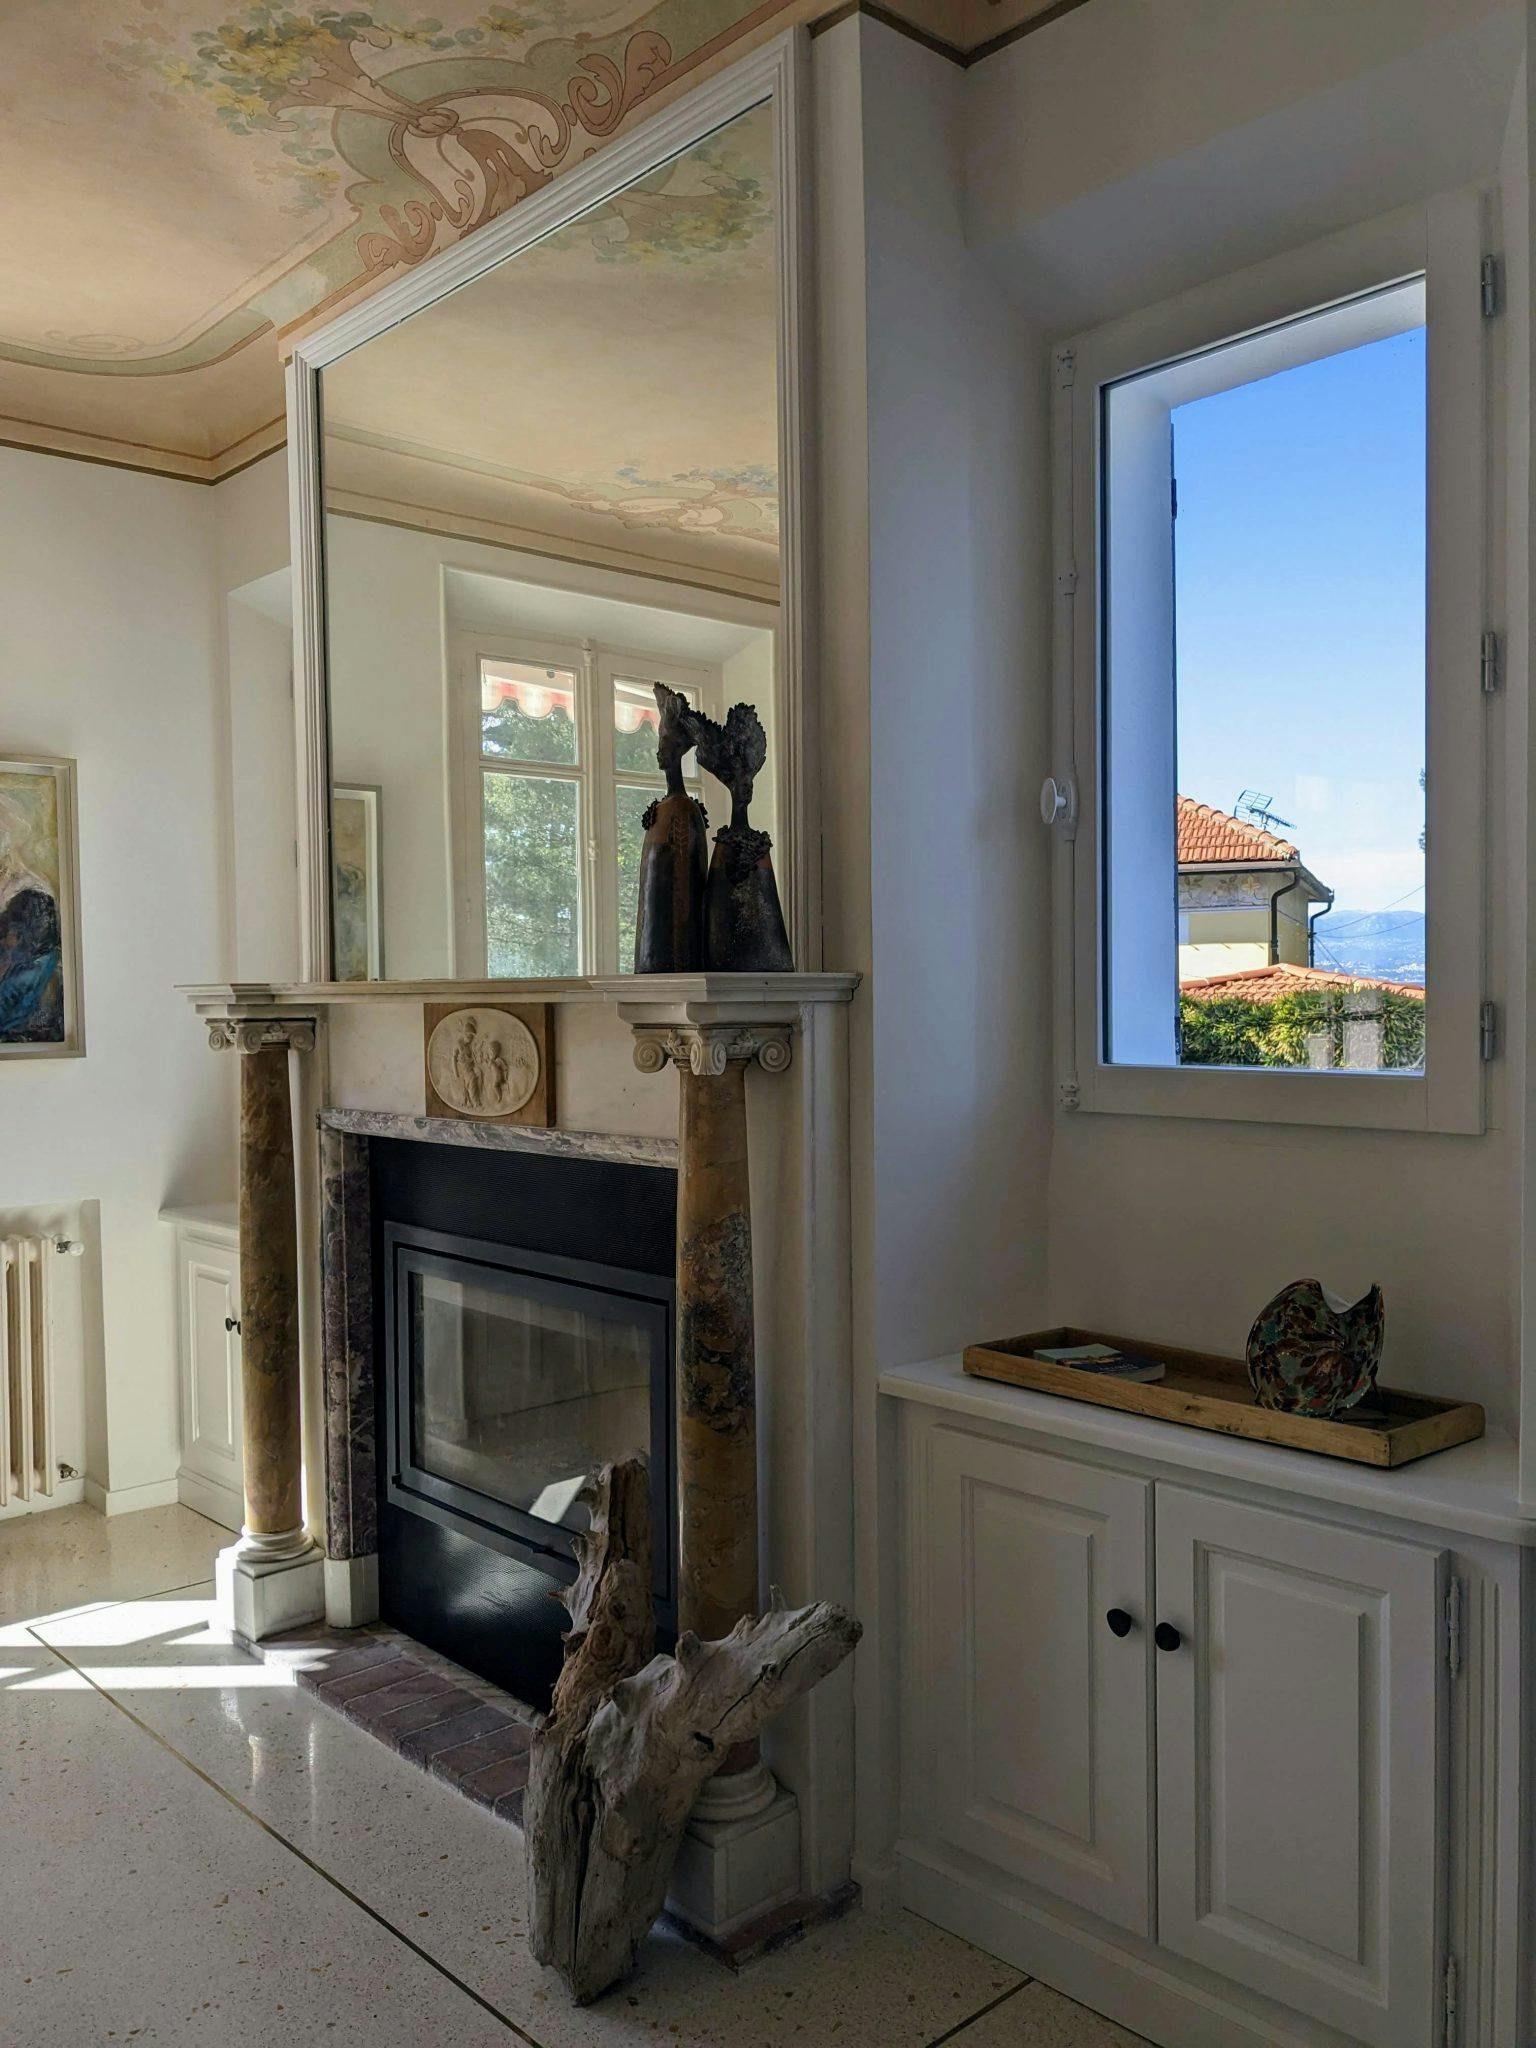 In the living room: antique marble fireplace with mirror above, window overlooking the outdoors